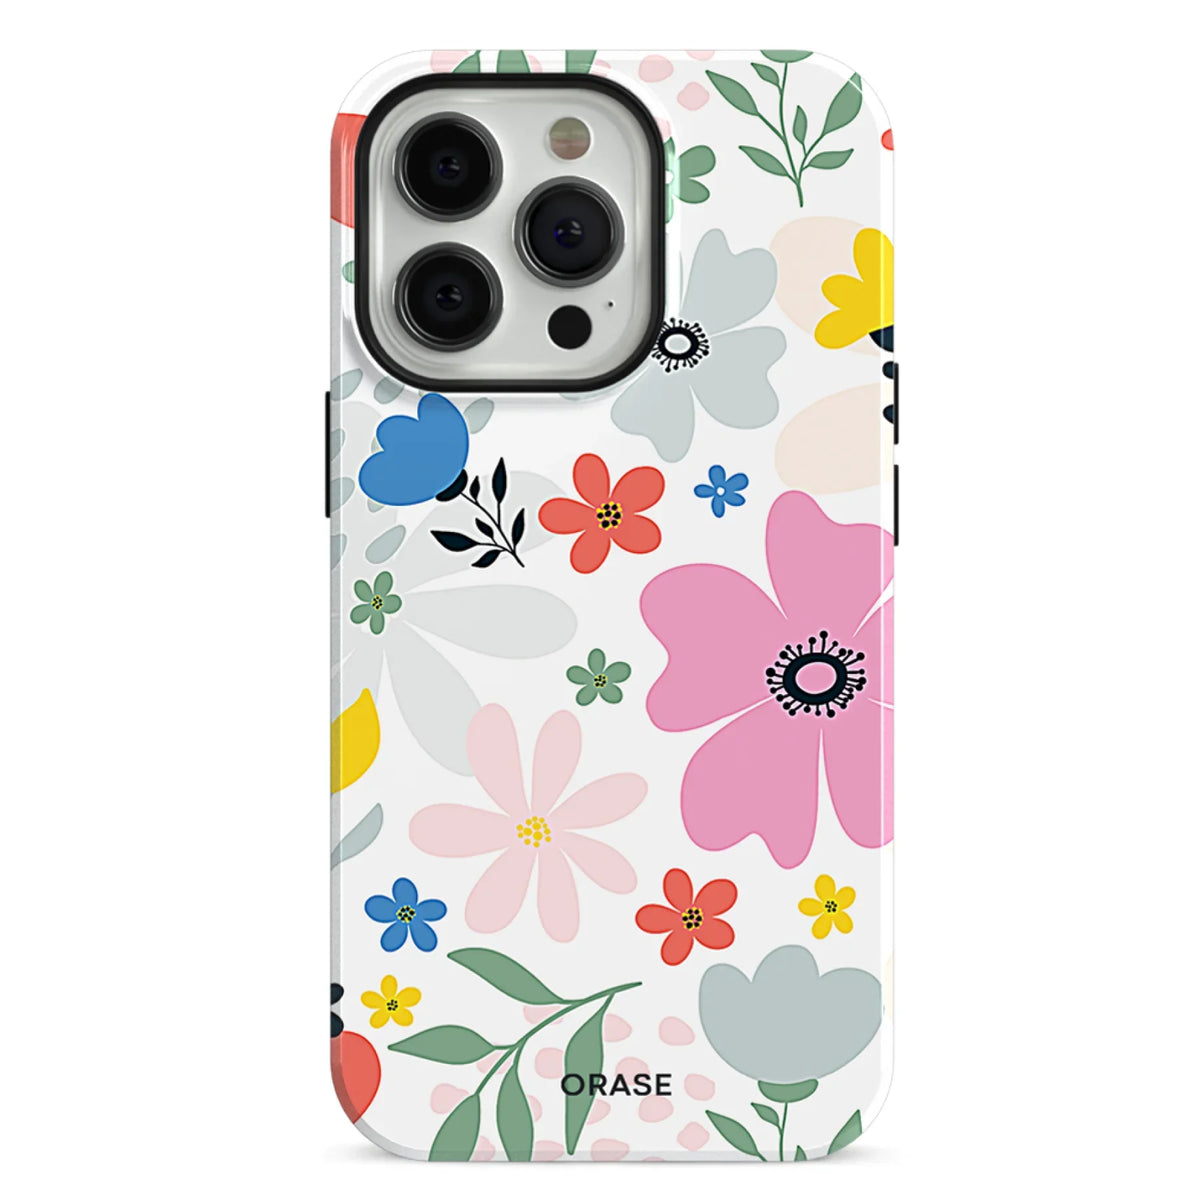 Flower Power iPhone Case - Select a Device